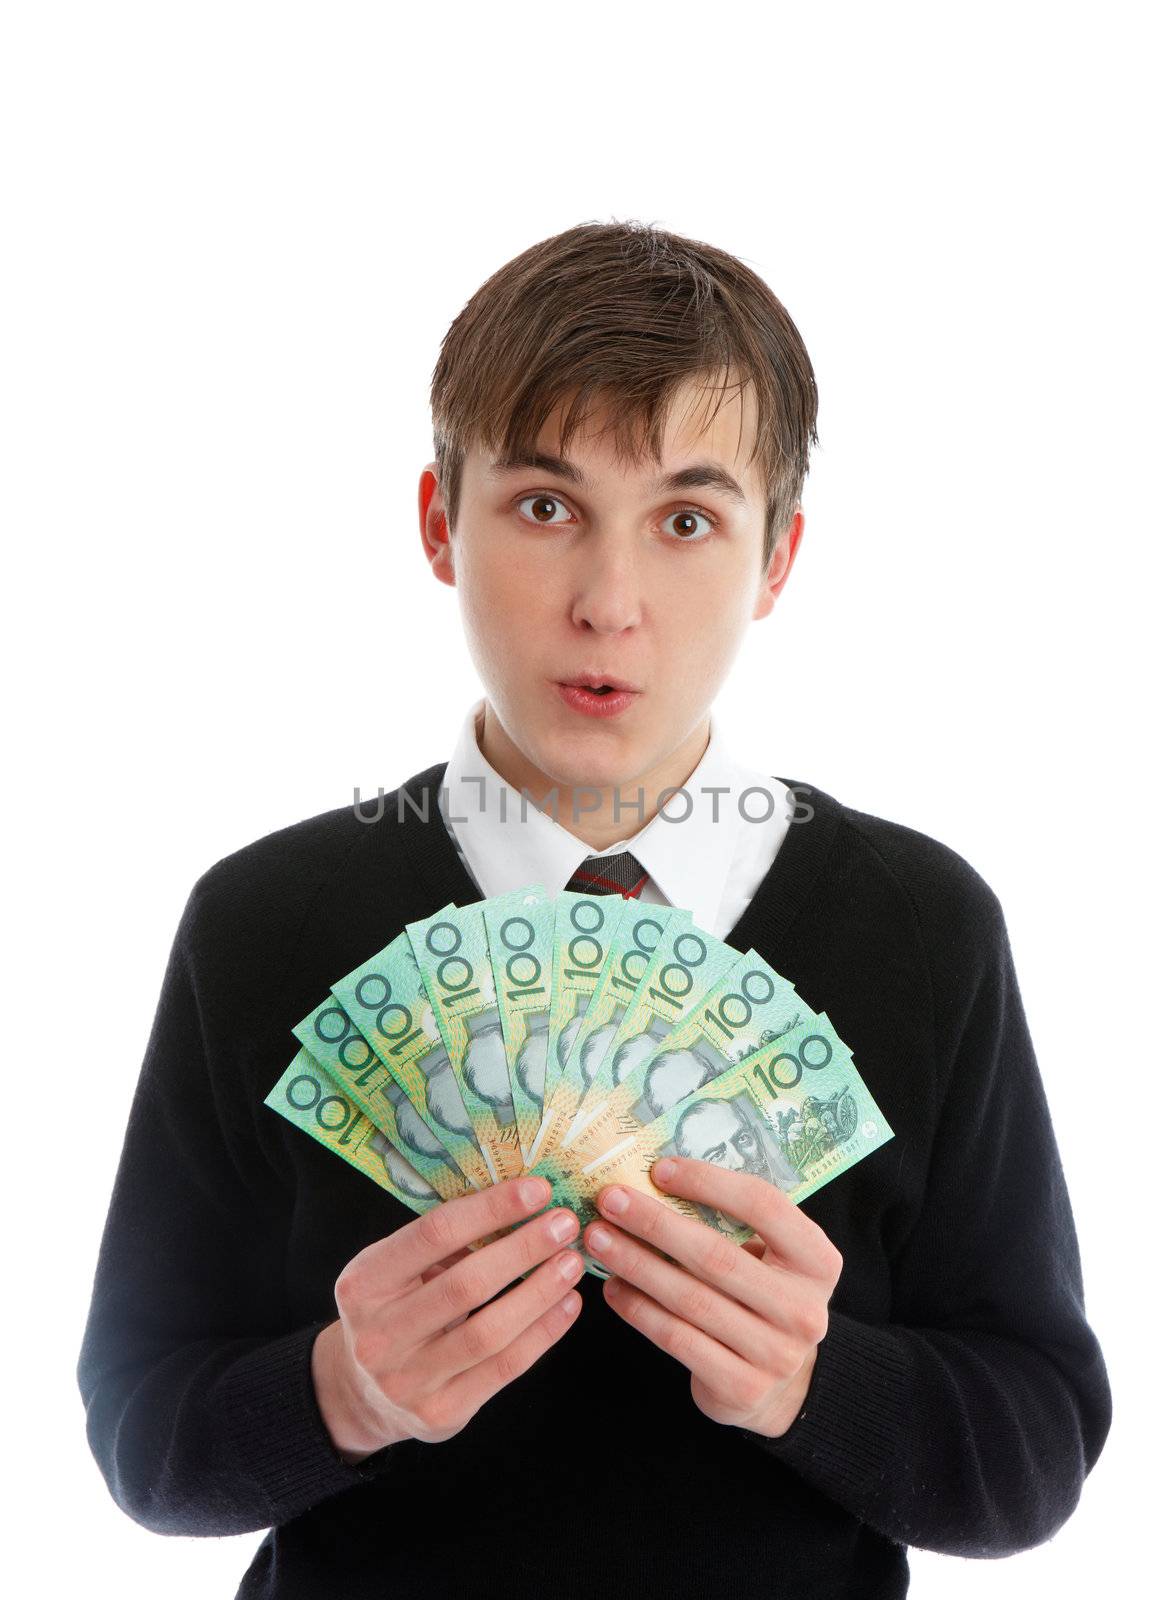 An excited student or a young worker holding a fan of 100 banknotes.  Concept for fundraising, school fees, wages, savings, winnings, student loans, scholarship etc.  White background.